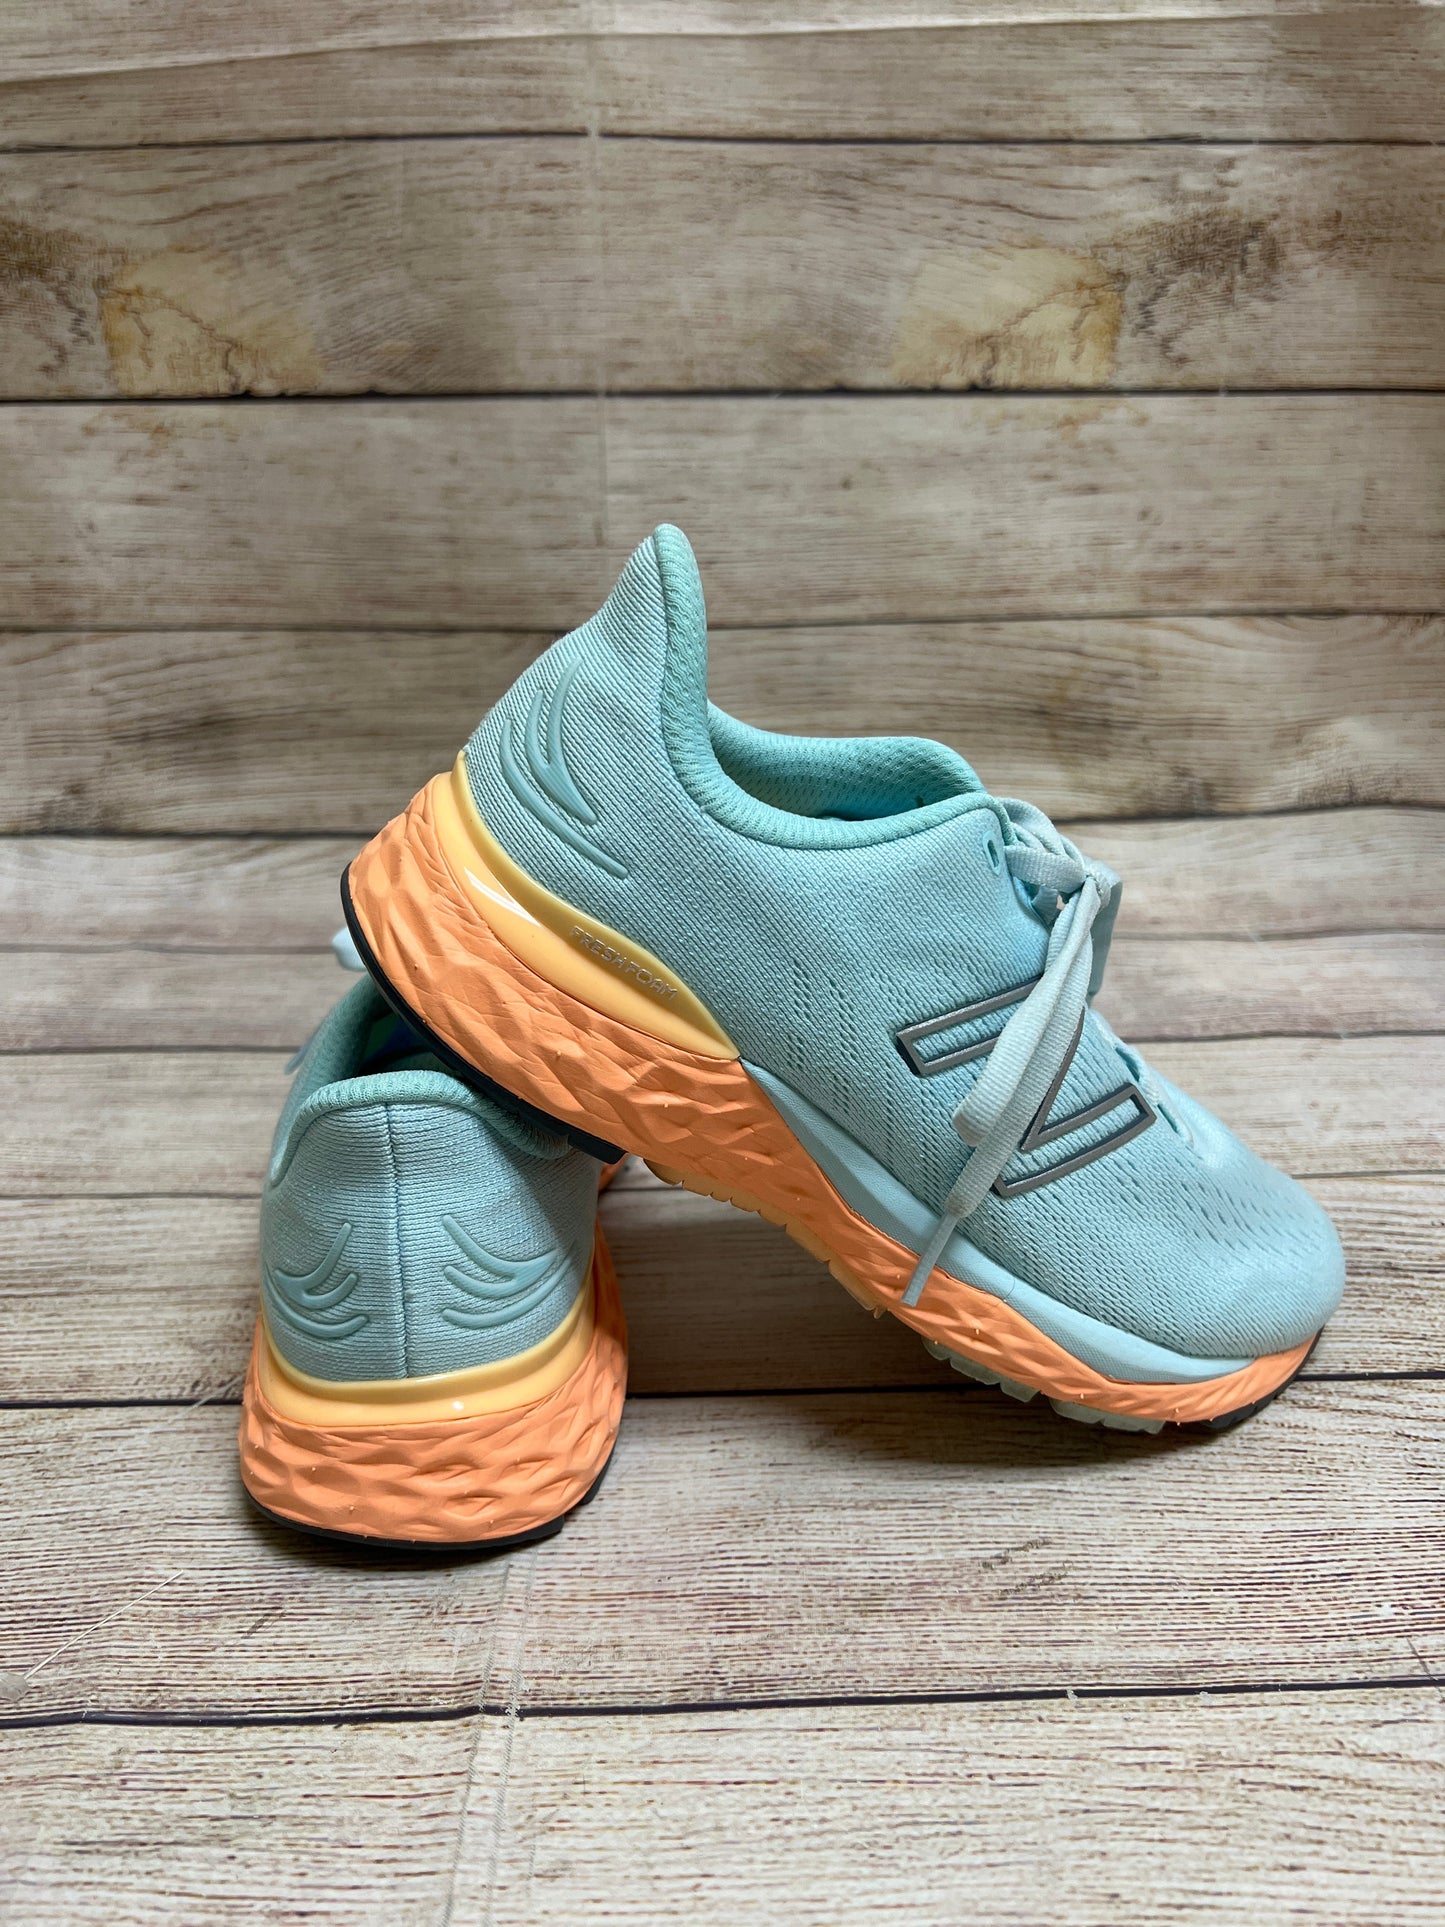 Shoes Athletic By New Balance  Size: 6.5